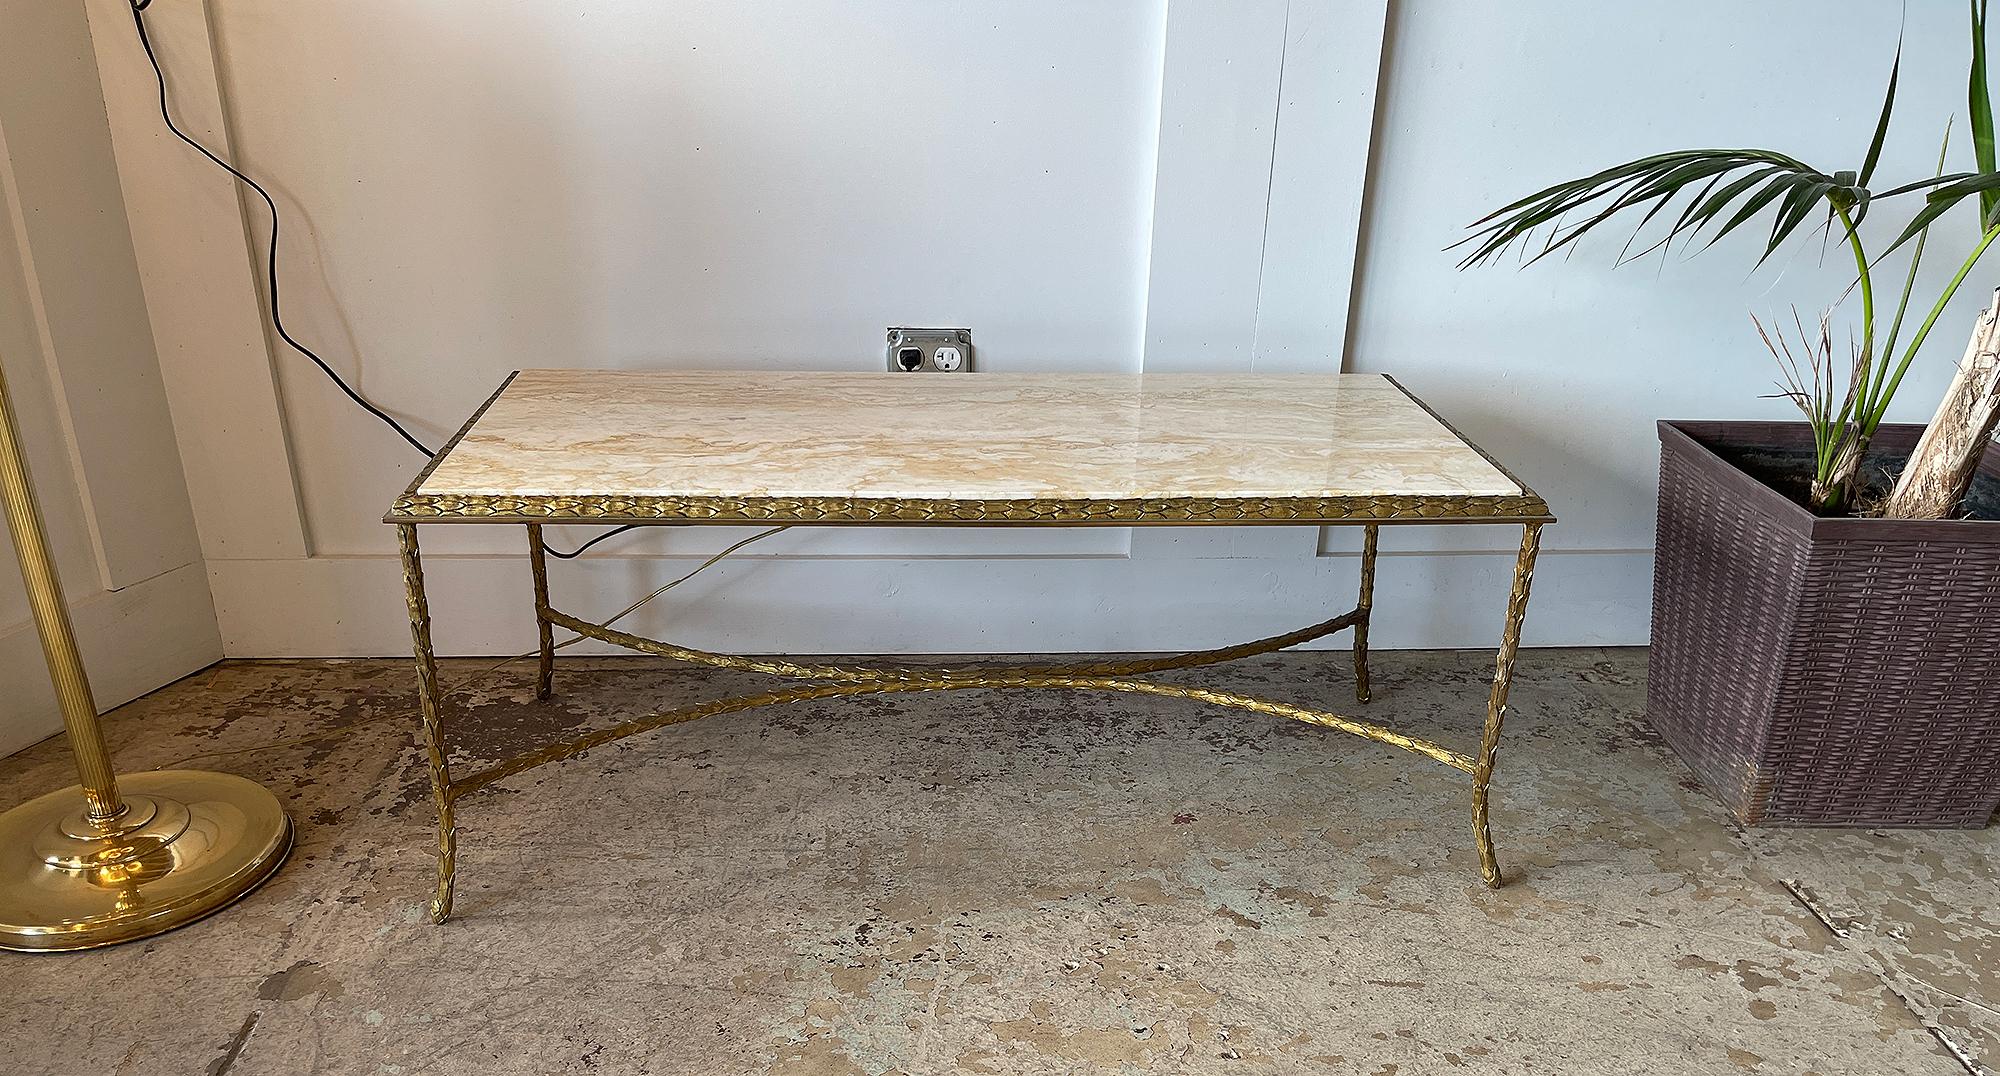 Maison Charles, circa 1960s

This very elegant Maison Charles coffee table is in its original condition; It has a gilt bronze, palm trunk motif frame and a beautiful travertine top. The feet on each leg and the edge have a ram Horn